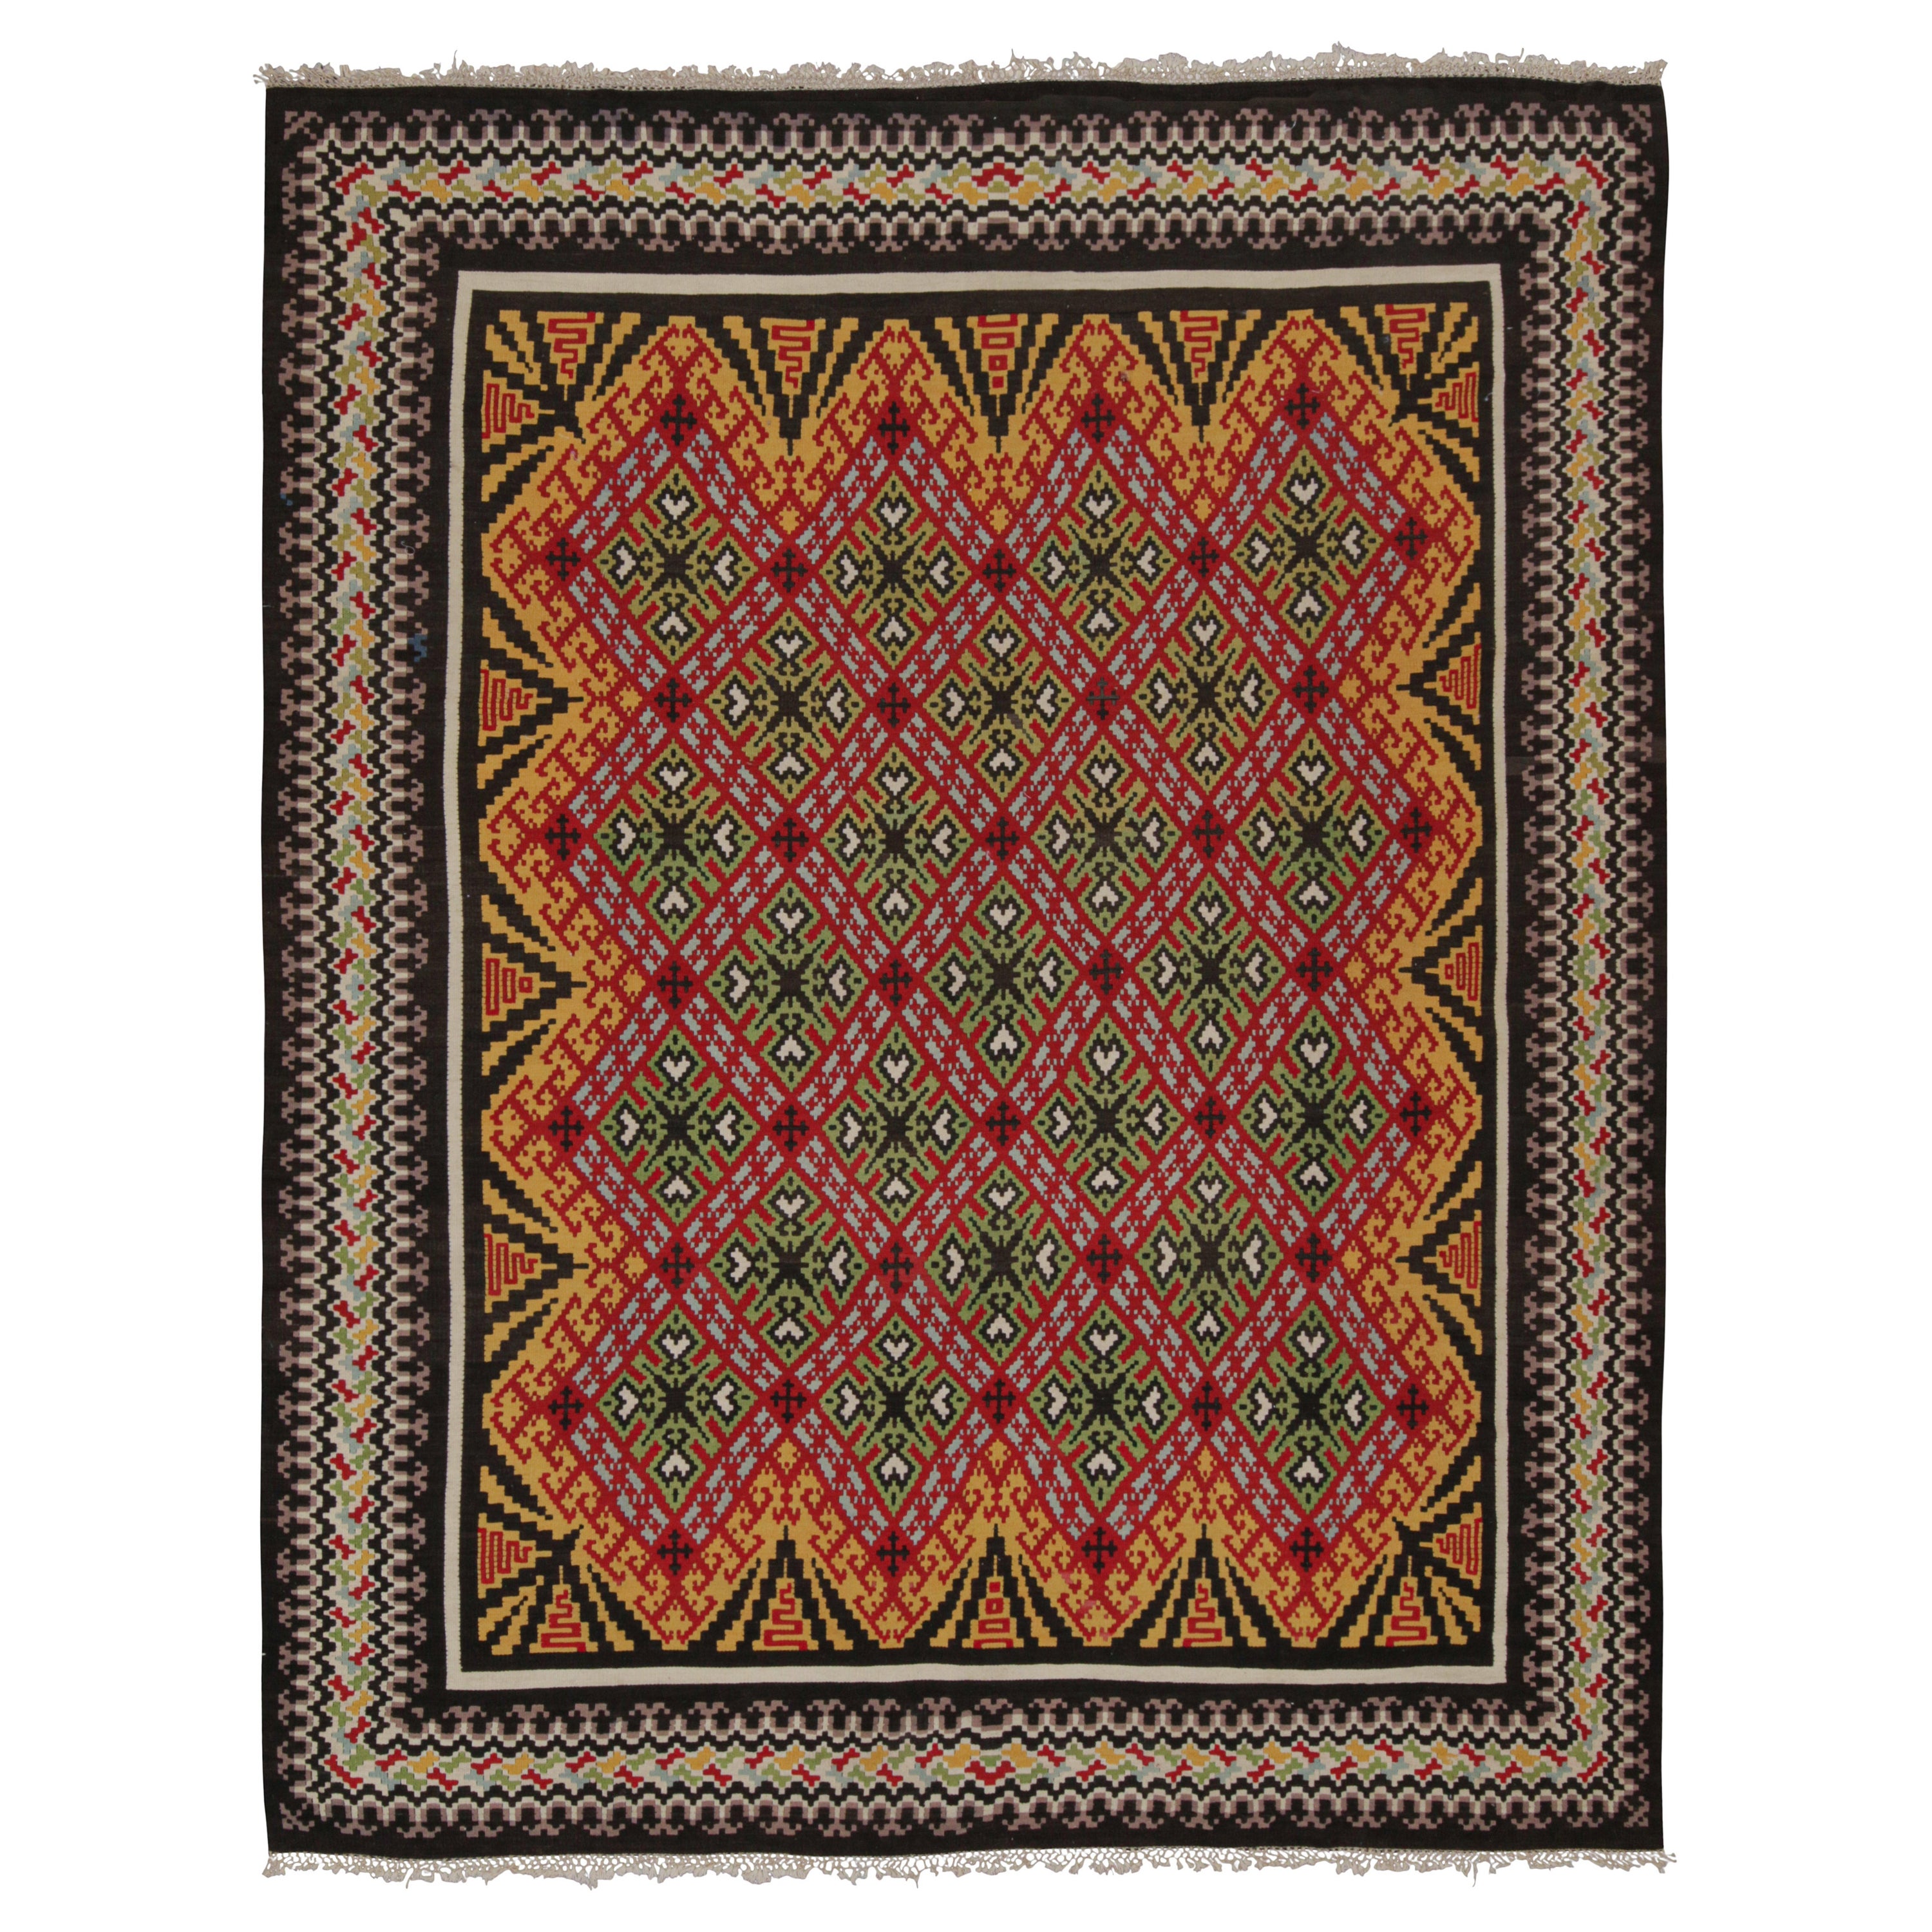 Vintage Balkan Kilim with Gold, Red & Green Geometric Patterns from Rug & Kilim For Sale